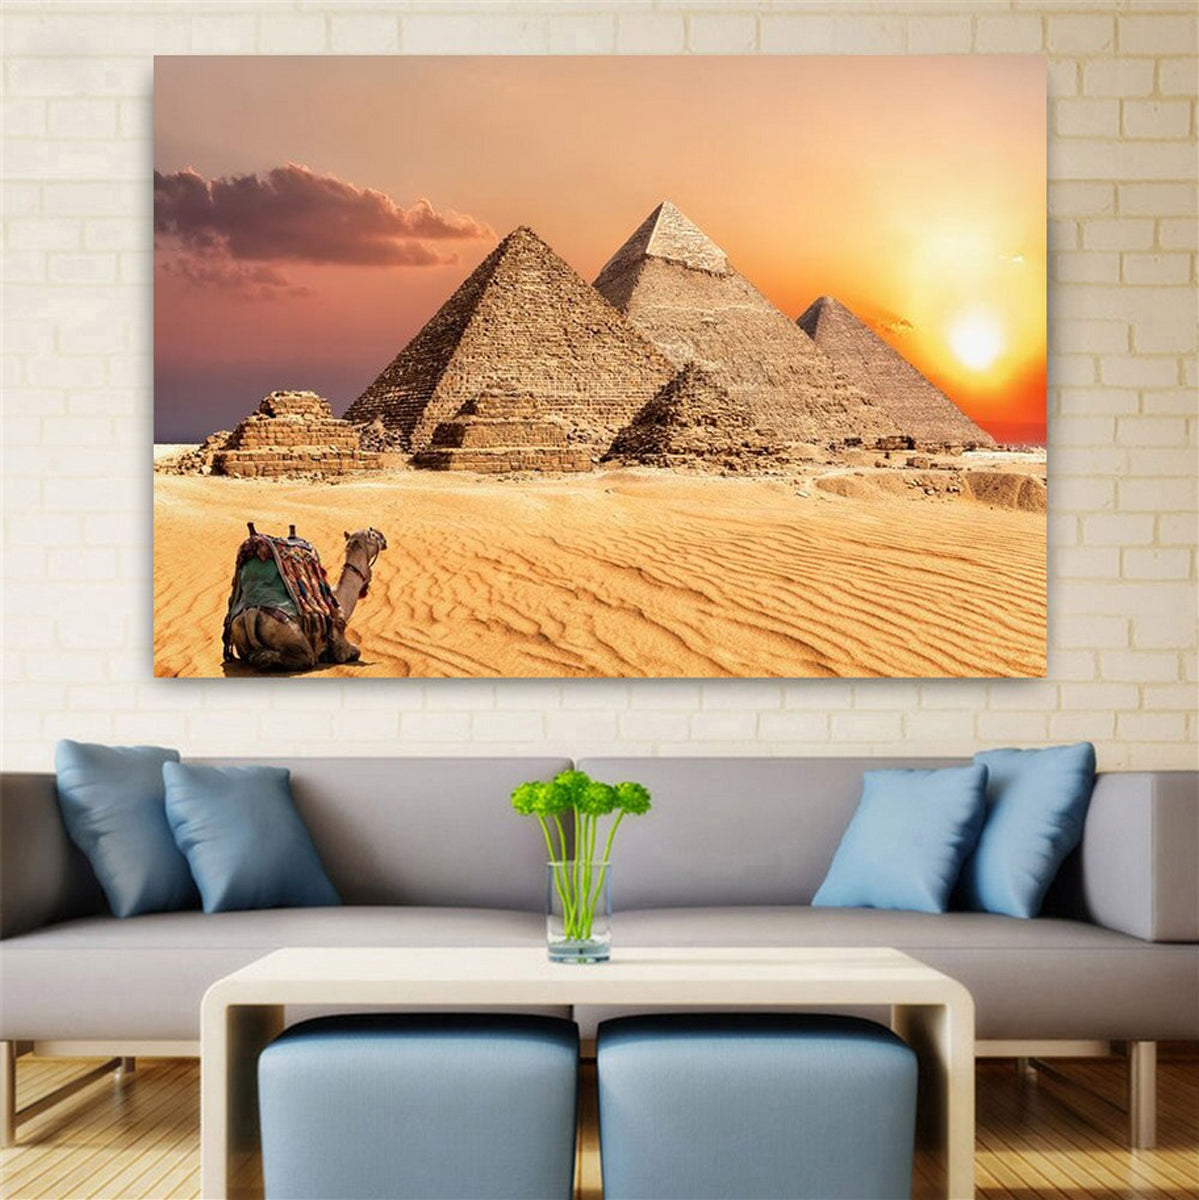 TPFLiving Sphin Traumpreisfabrik Canvas Egyptian Desert, – Poster Landscapes, / Pyramids,